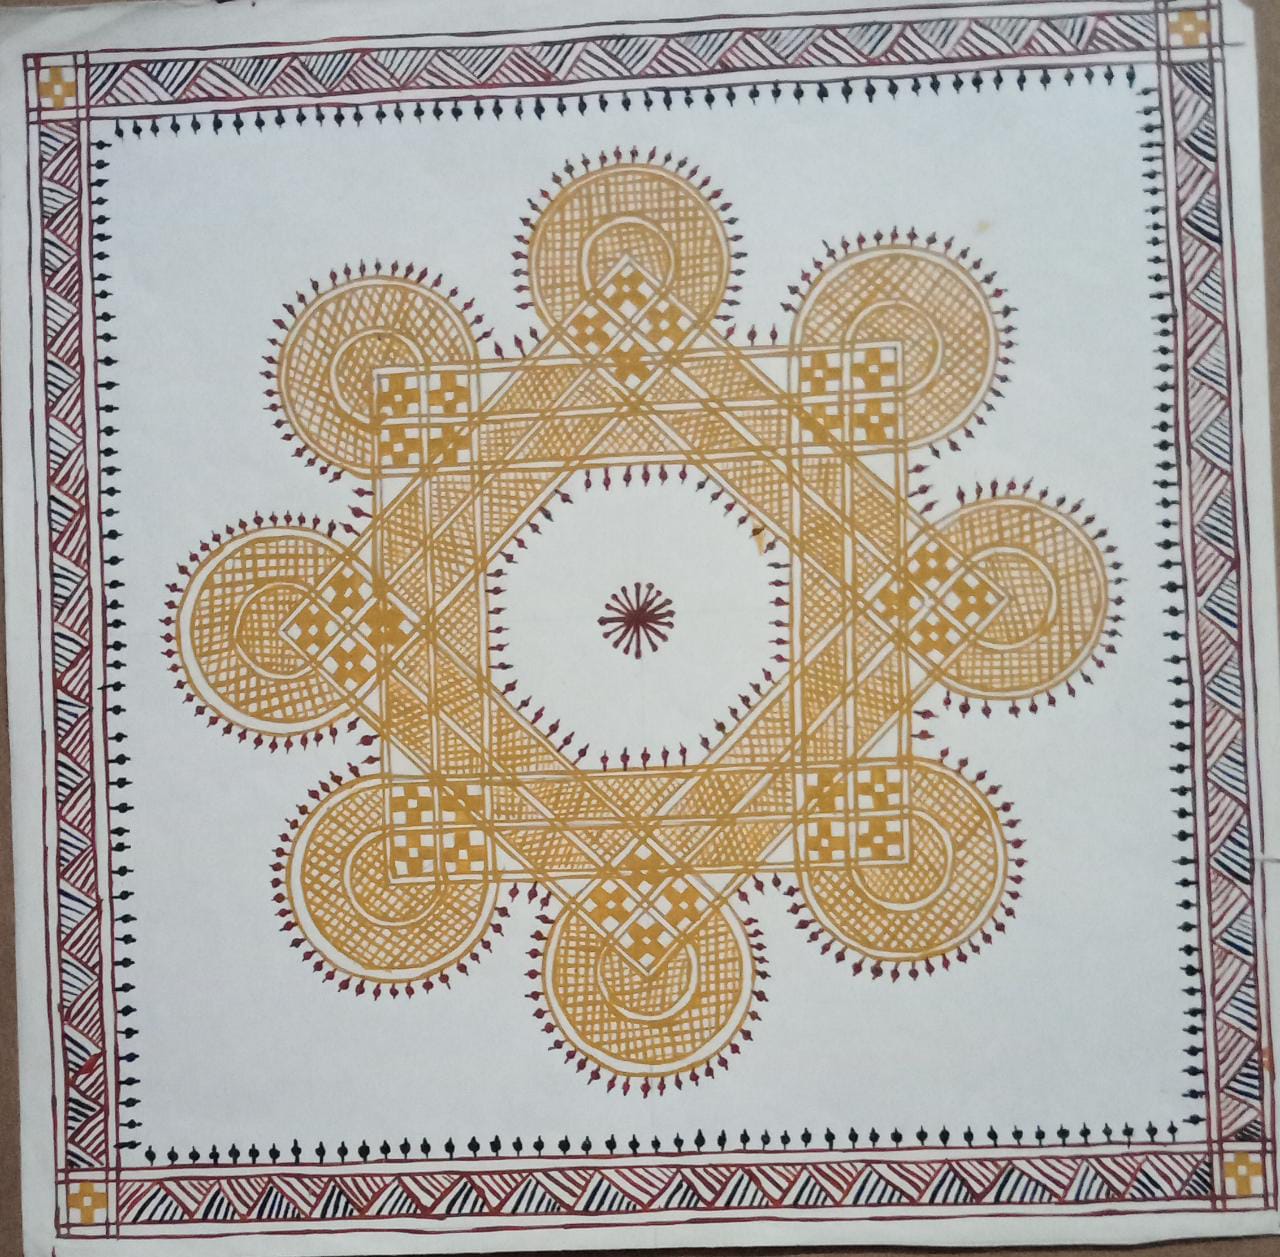 Chittara 6 Lamps Painting by bamboo thread art without frame  Artist: State Awardee Saraswathi (Size: 12x12 Inches)